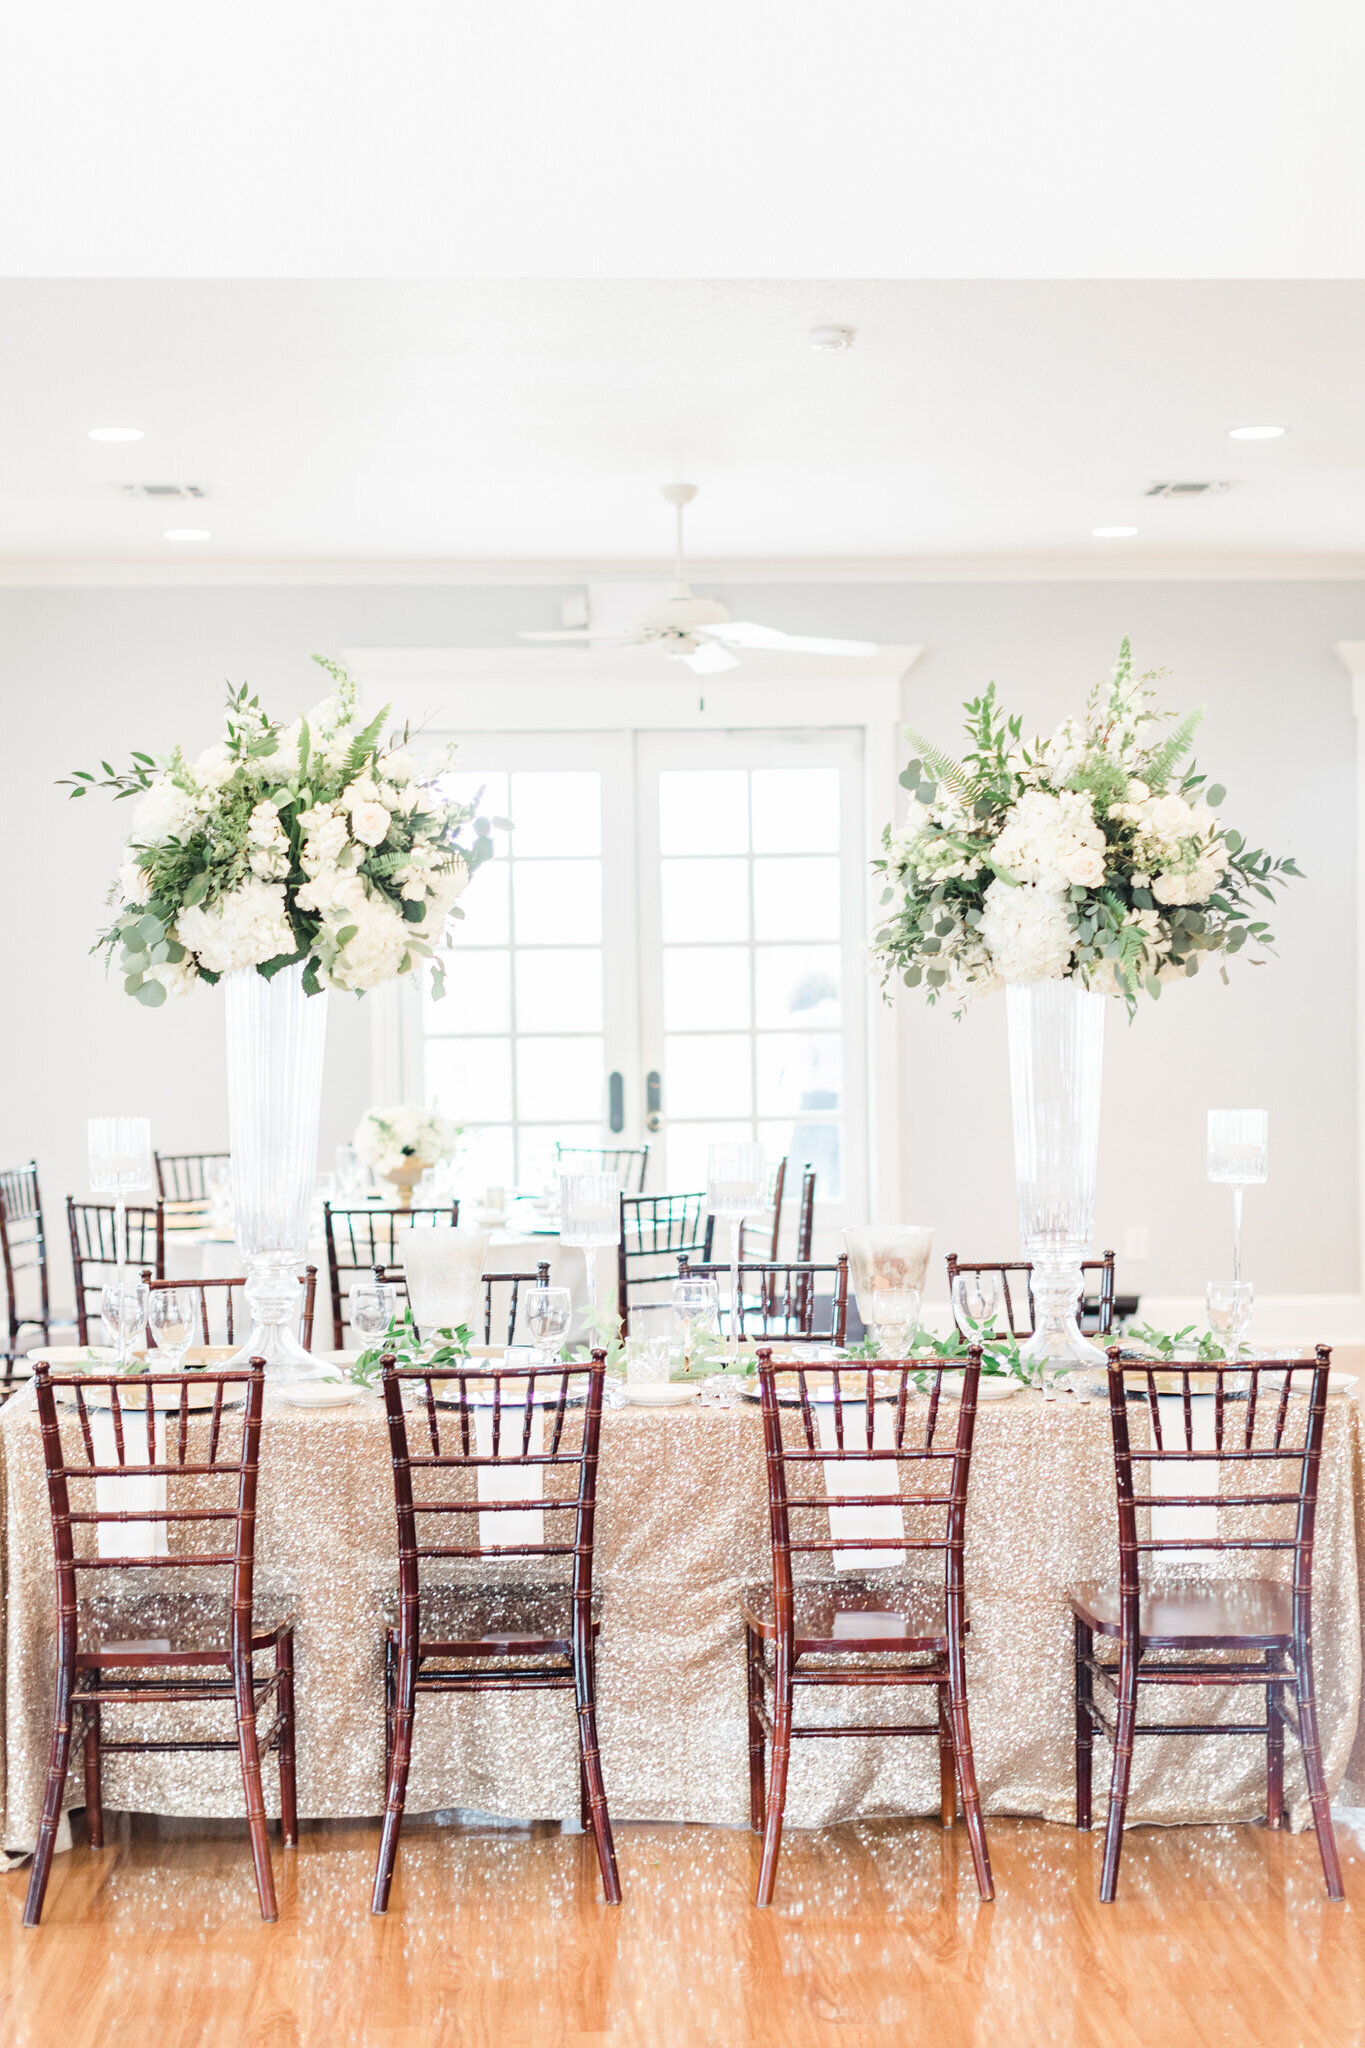 A table setting in the ballroom